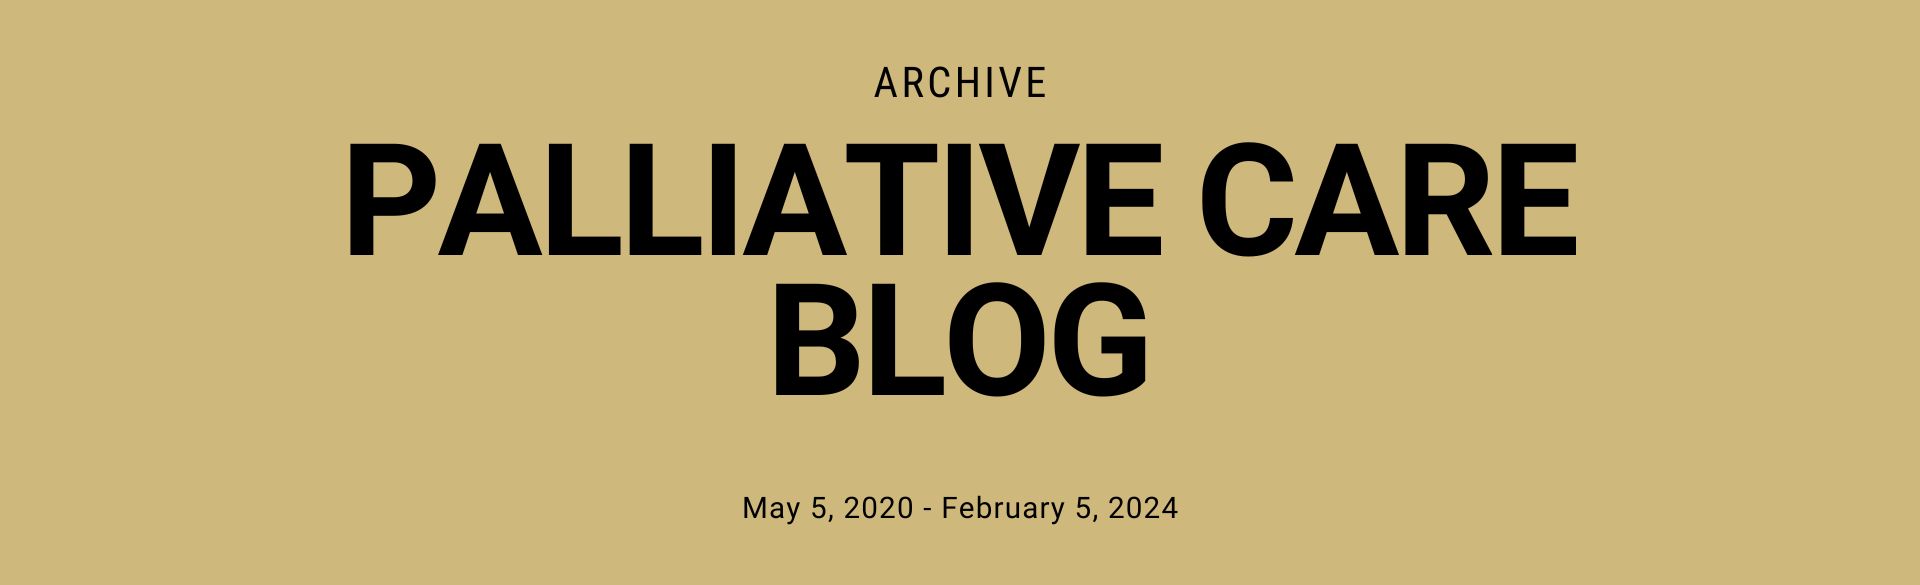 Archive of Palliative Care Blog May 2020 - February 2024